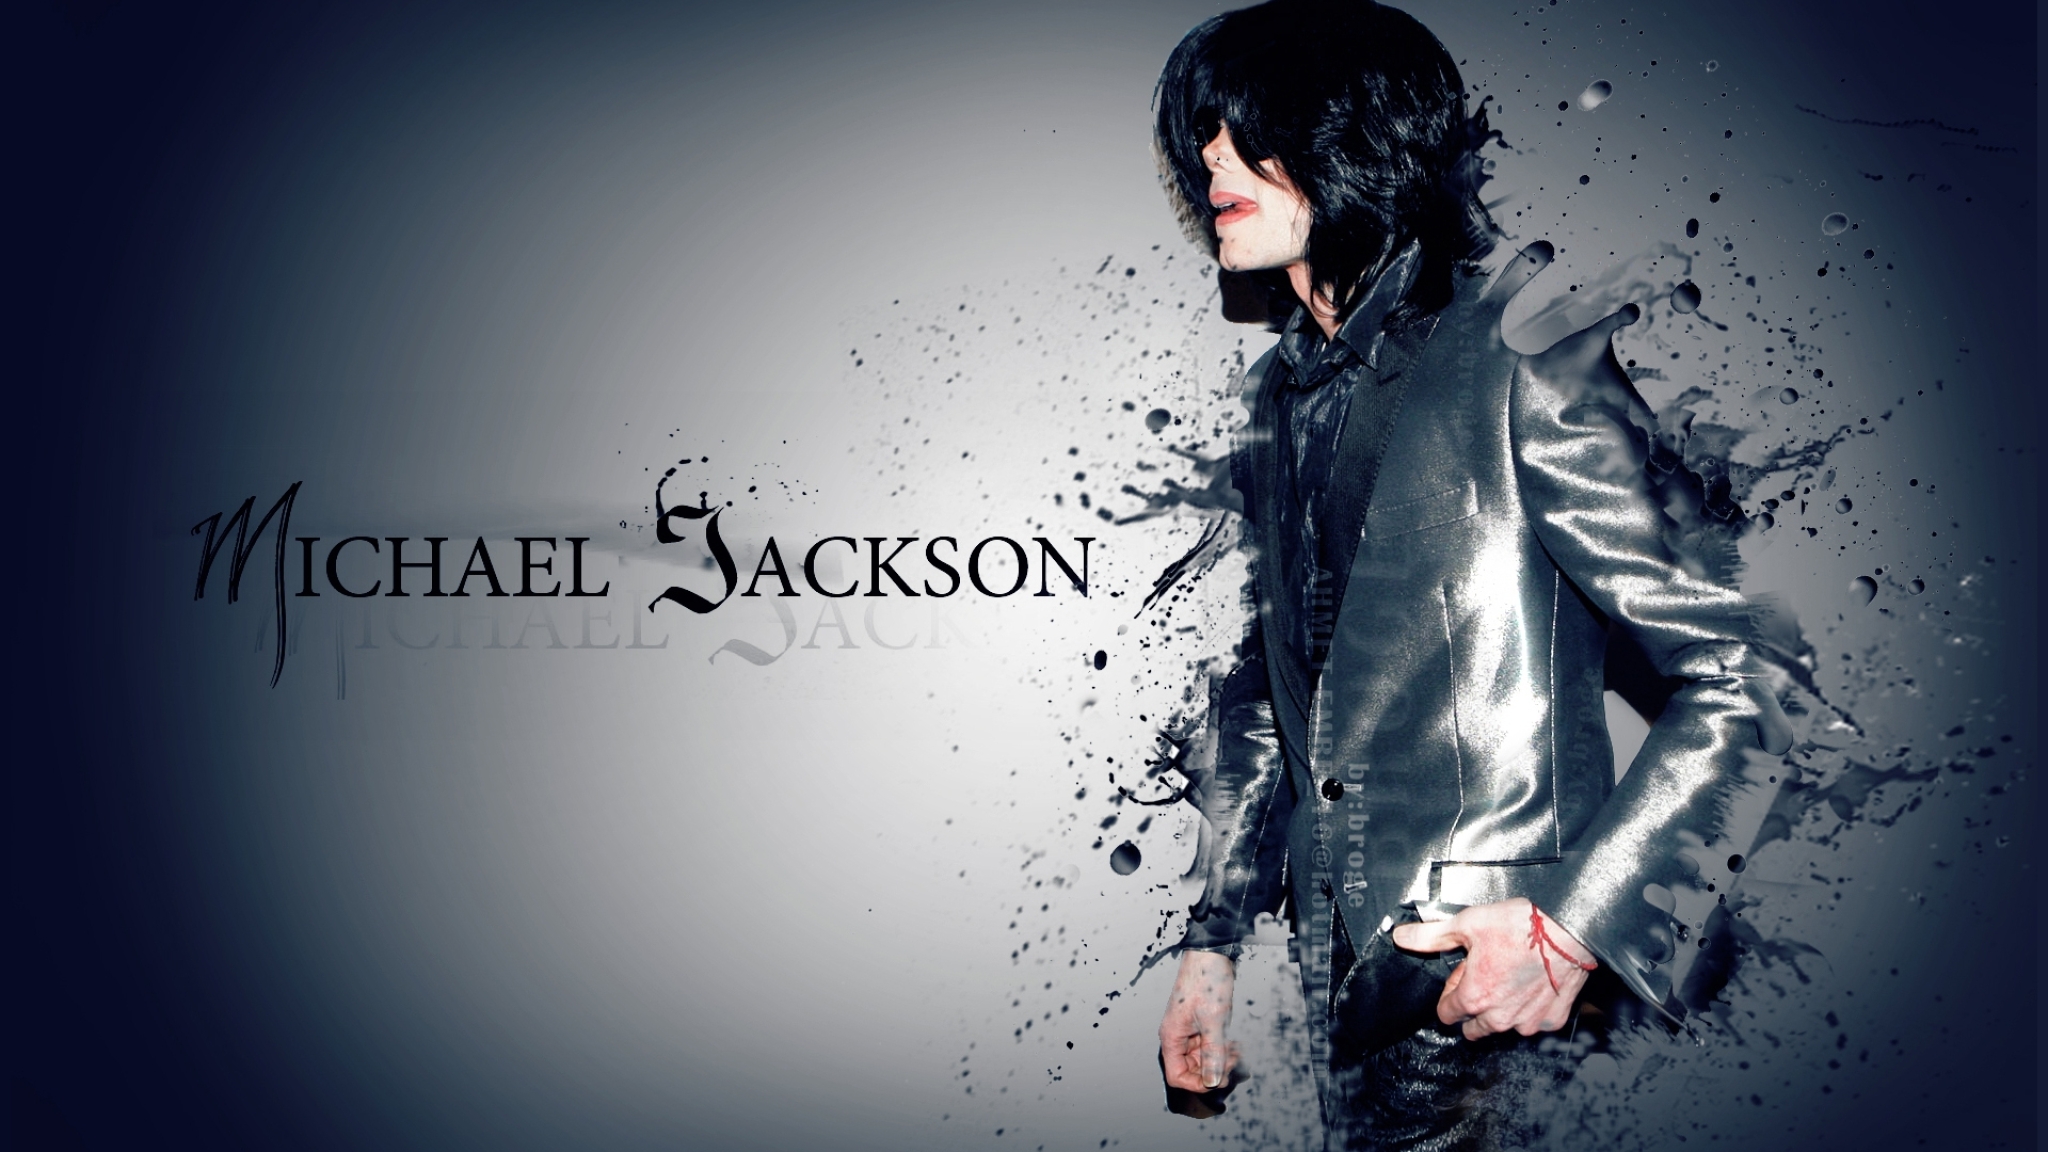 48x1152 Michael Jackson Glamorous Wallpapers 48x1152 Resolution Wallpaper Hd Celebrities 4k Wallpapers Images Photos And Background